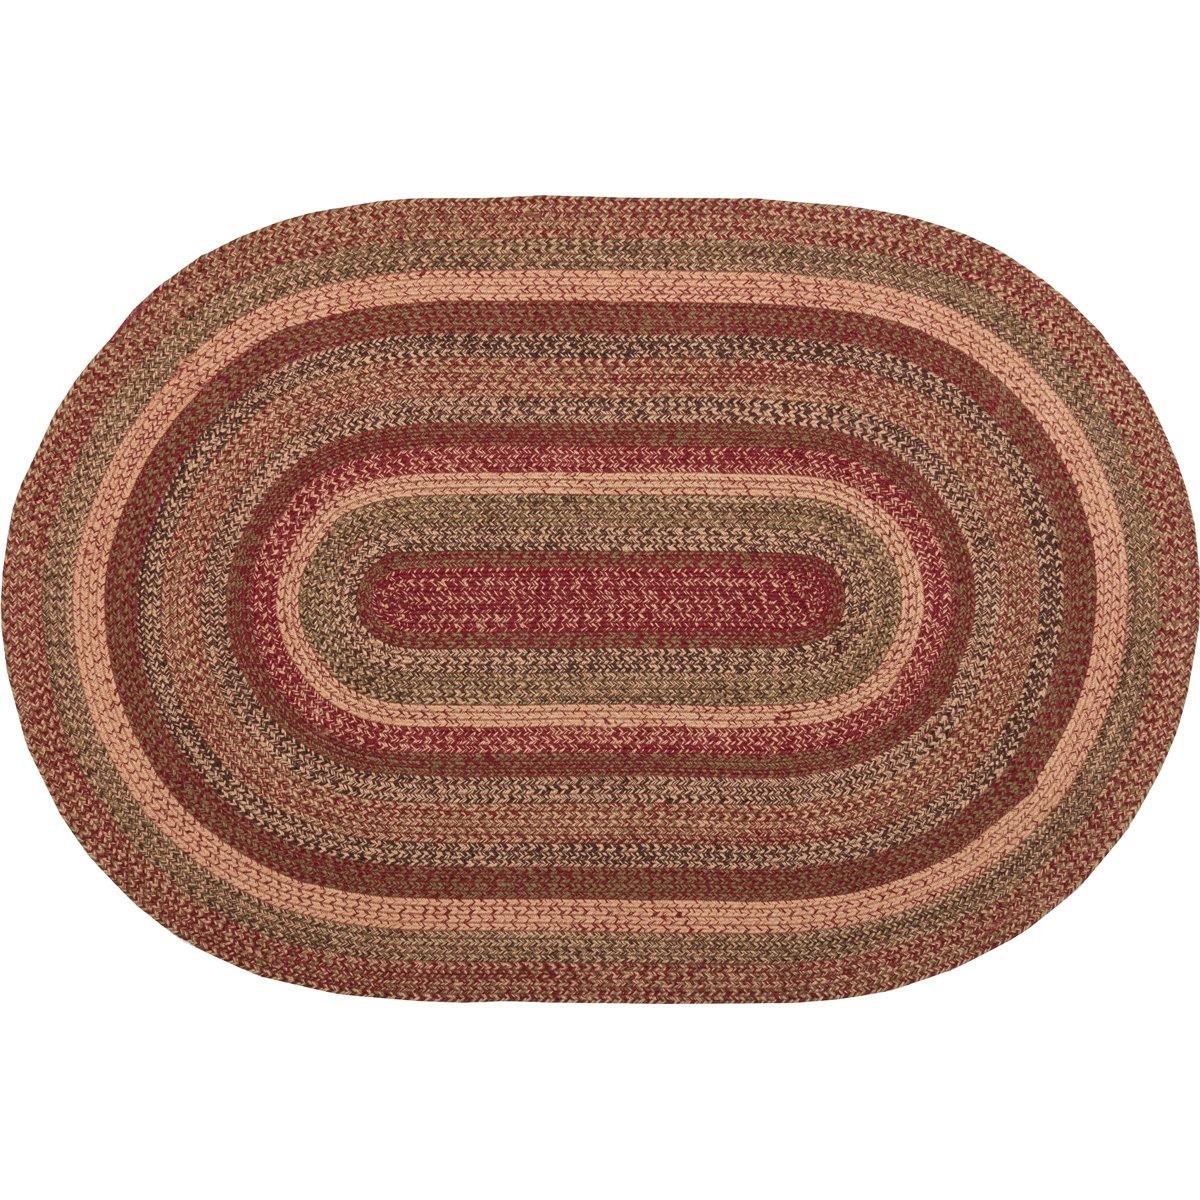 Cider Mill Jute Braided Rug Oval 4'x6' with Rug Pad VHC Brands - The Fox Decor